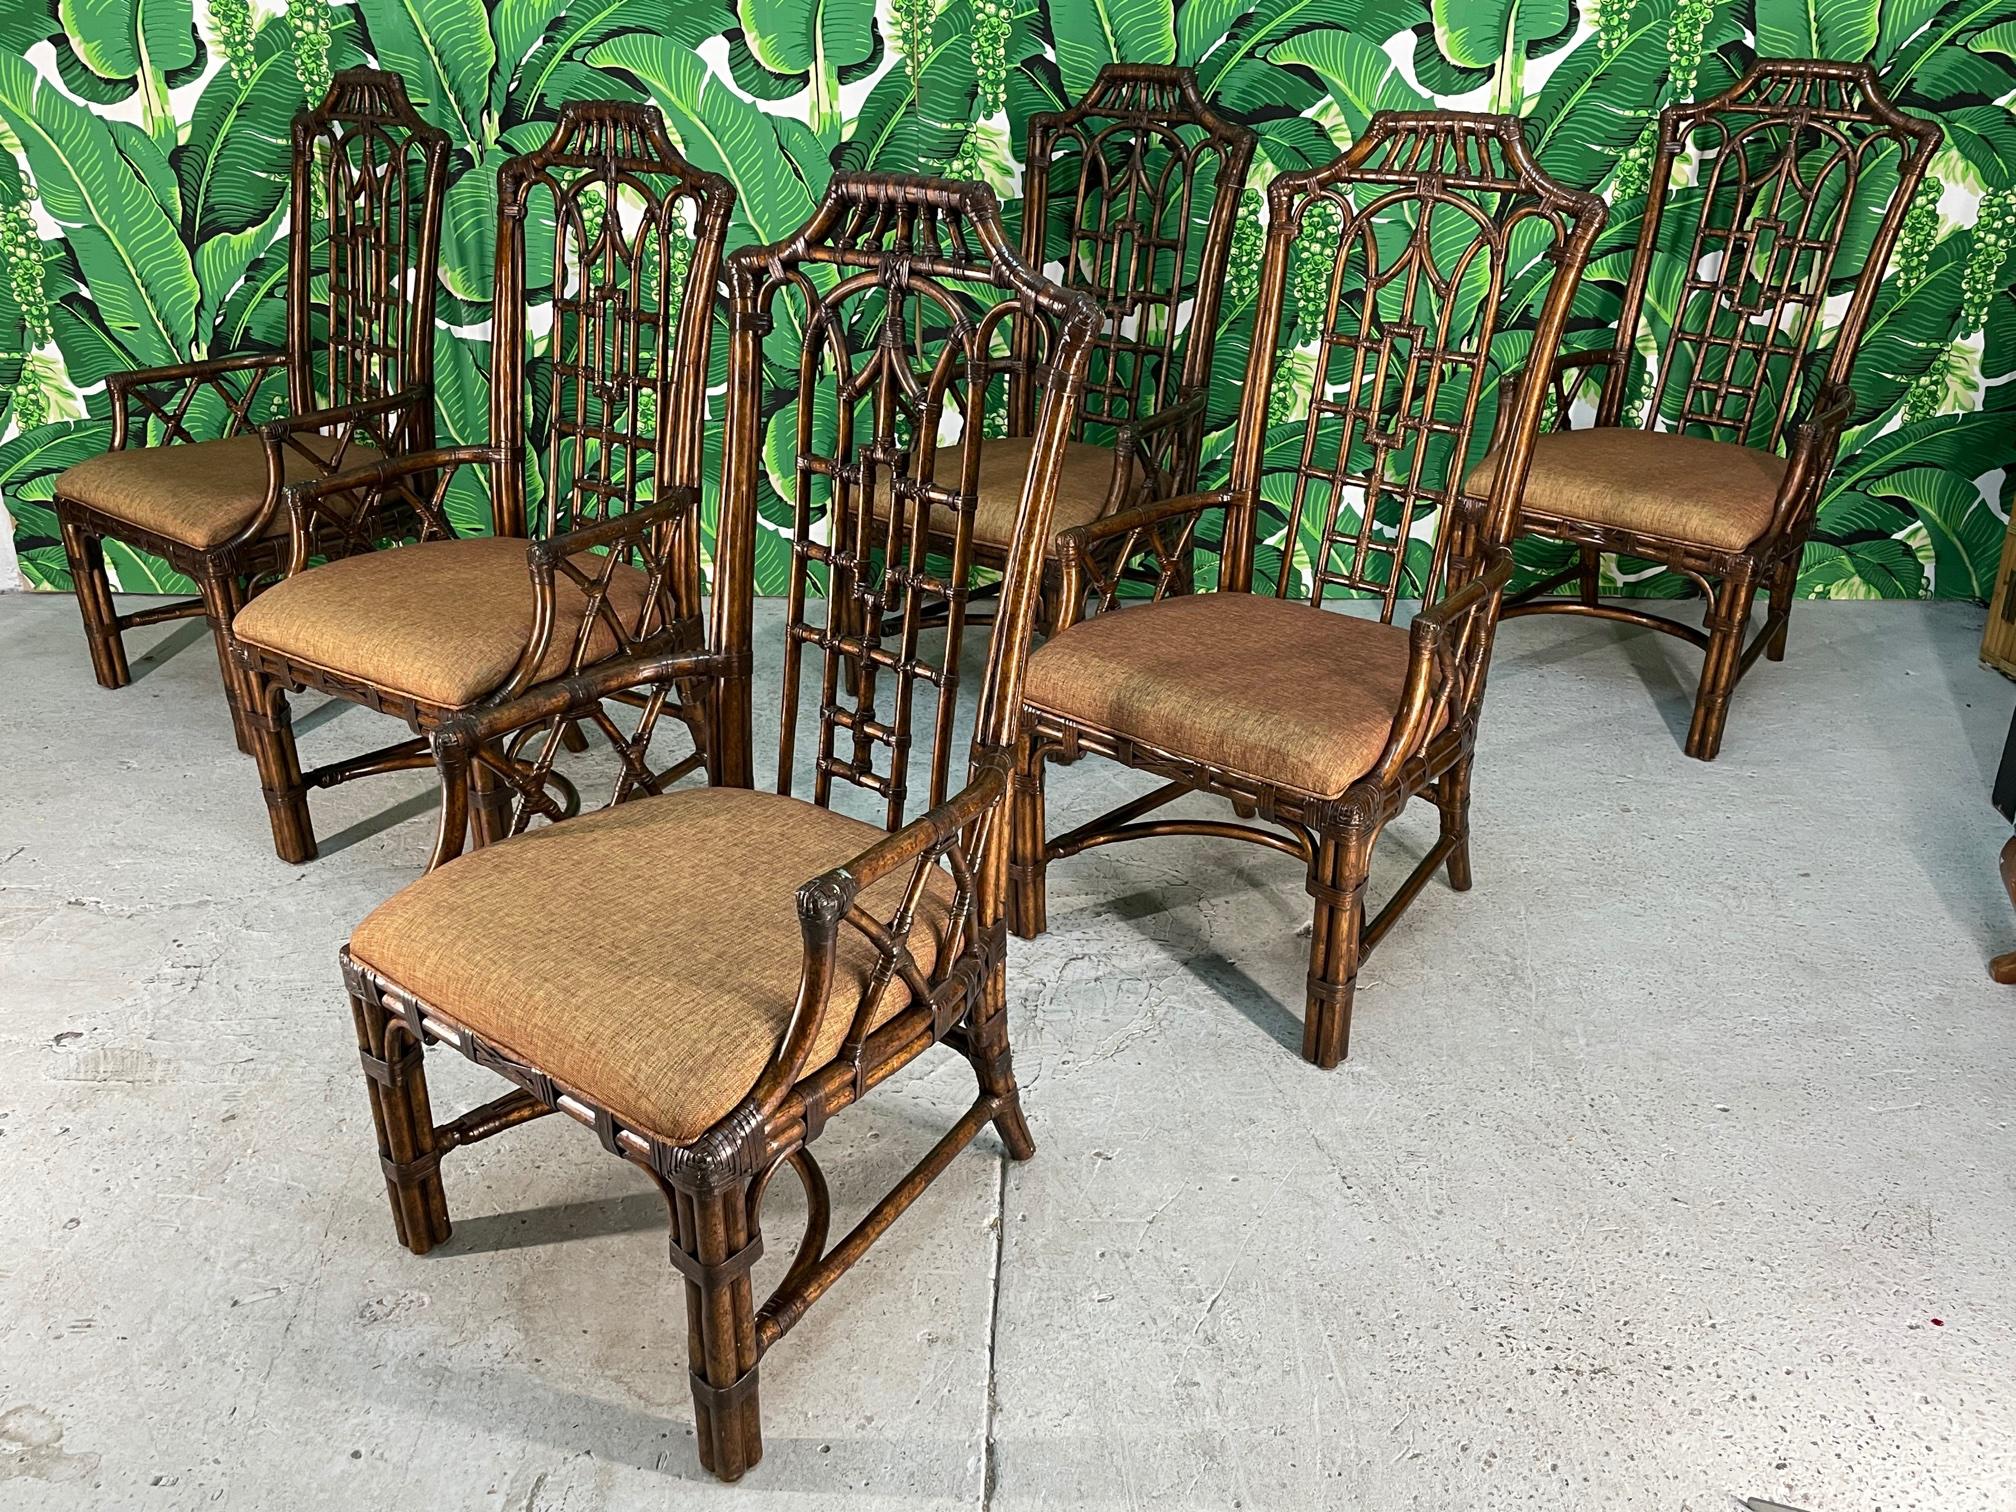 Set of six Asian dining chairs feature full rattan frame and intricate pagoda style fretwork. Good condition with minor imperfections consistent with age.

Background courtesy of Dorothy Draper 